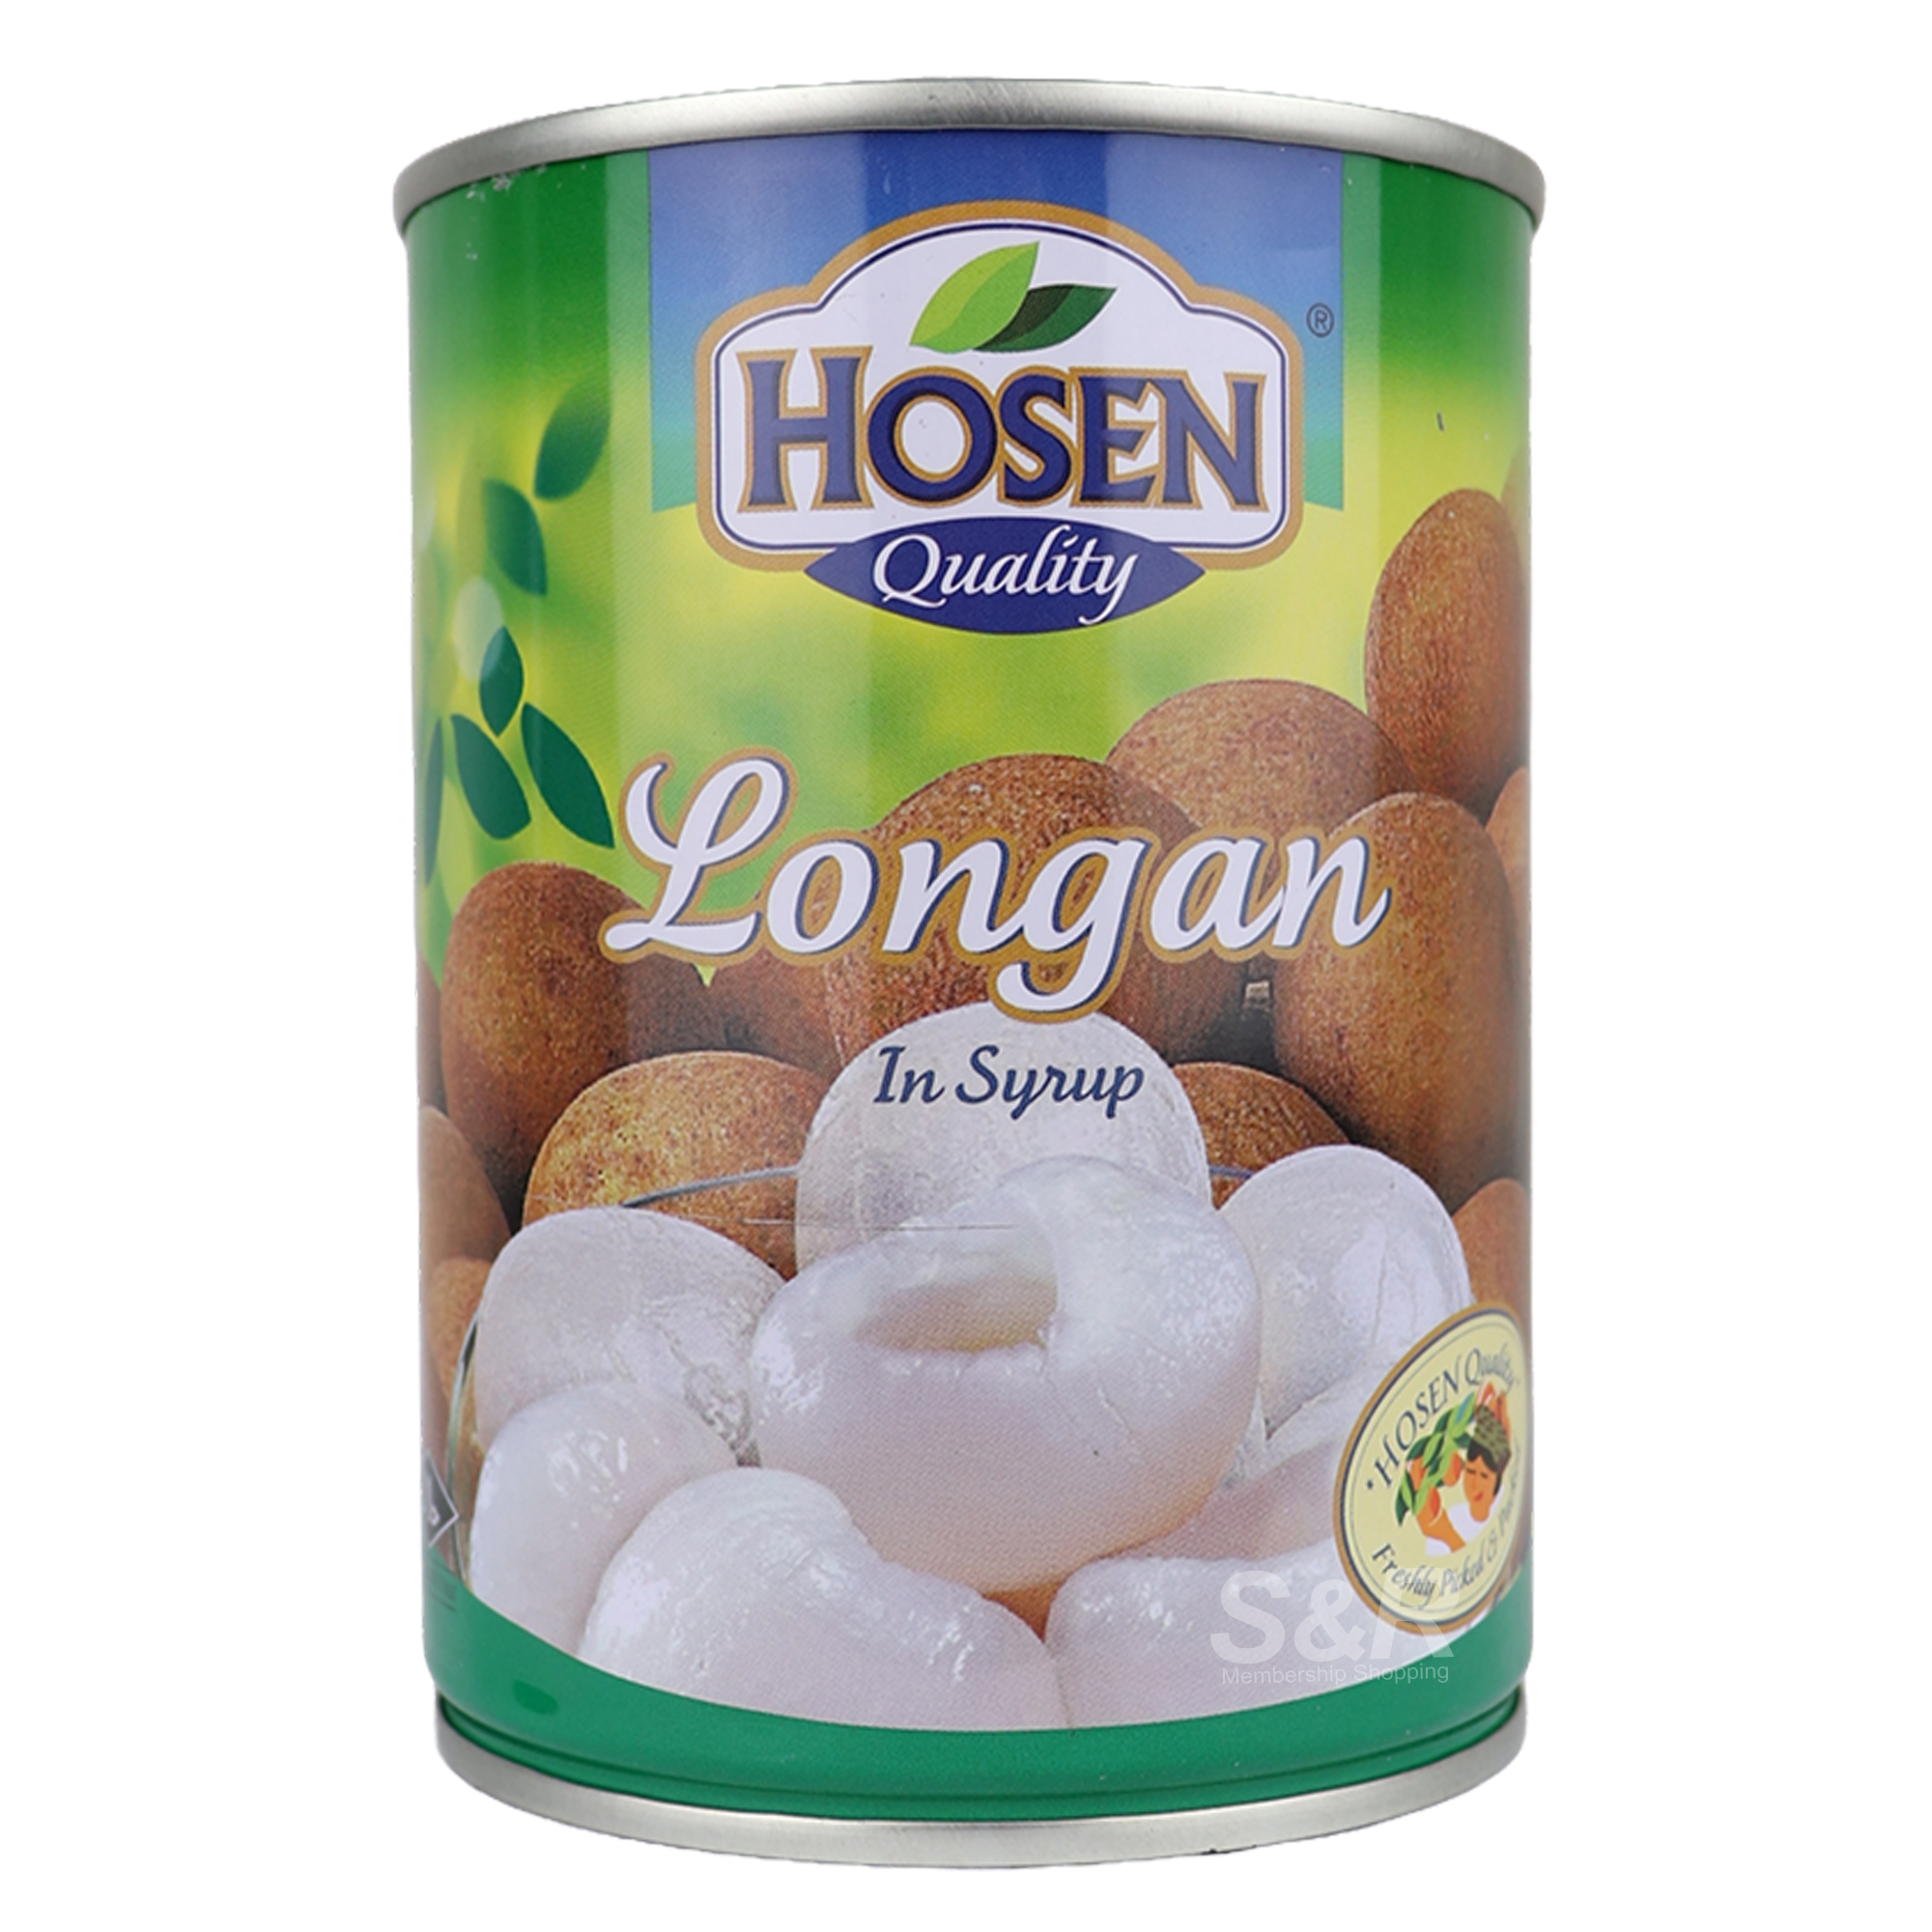 Hosen Quality Longan in Syrup 565g